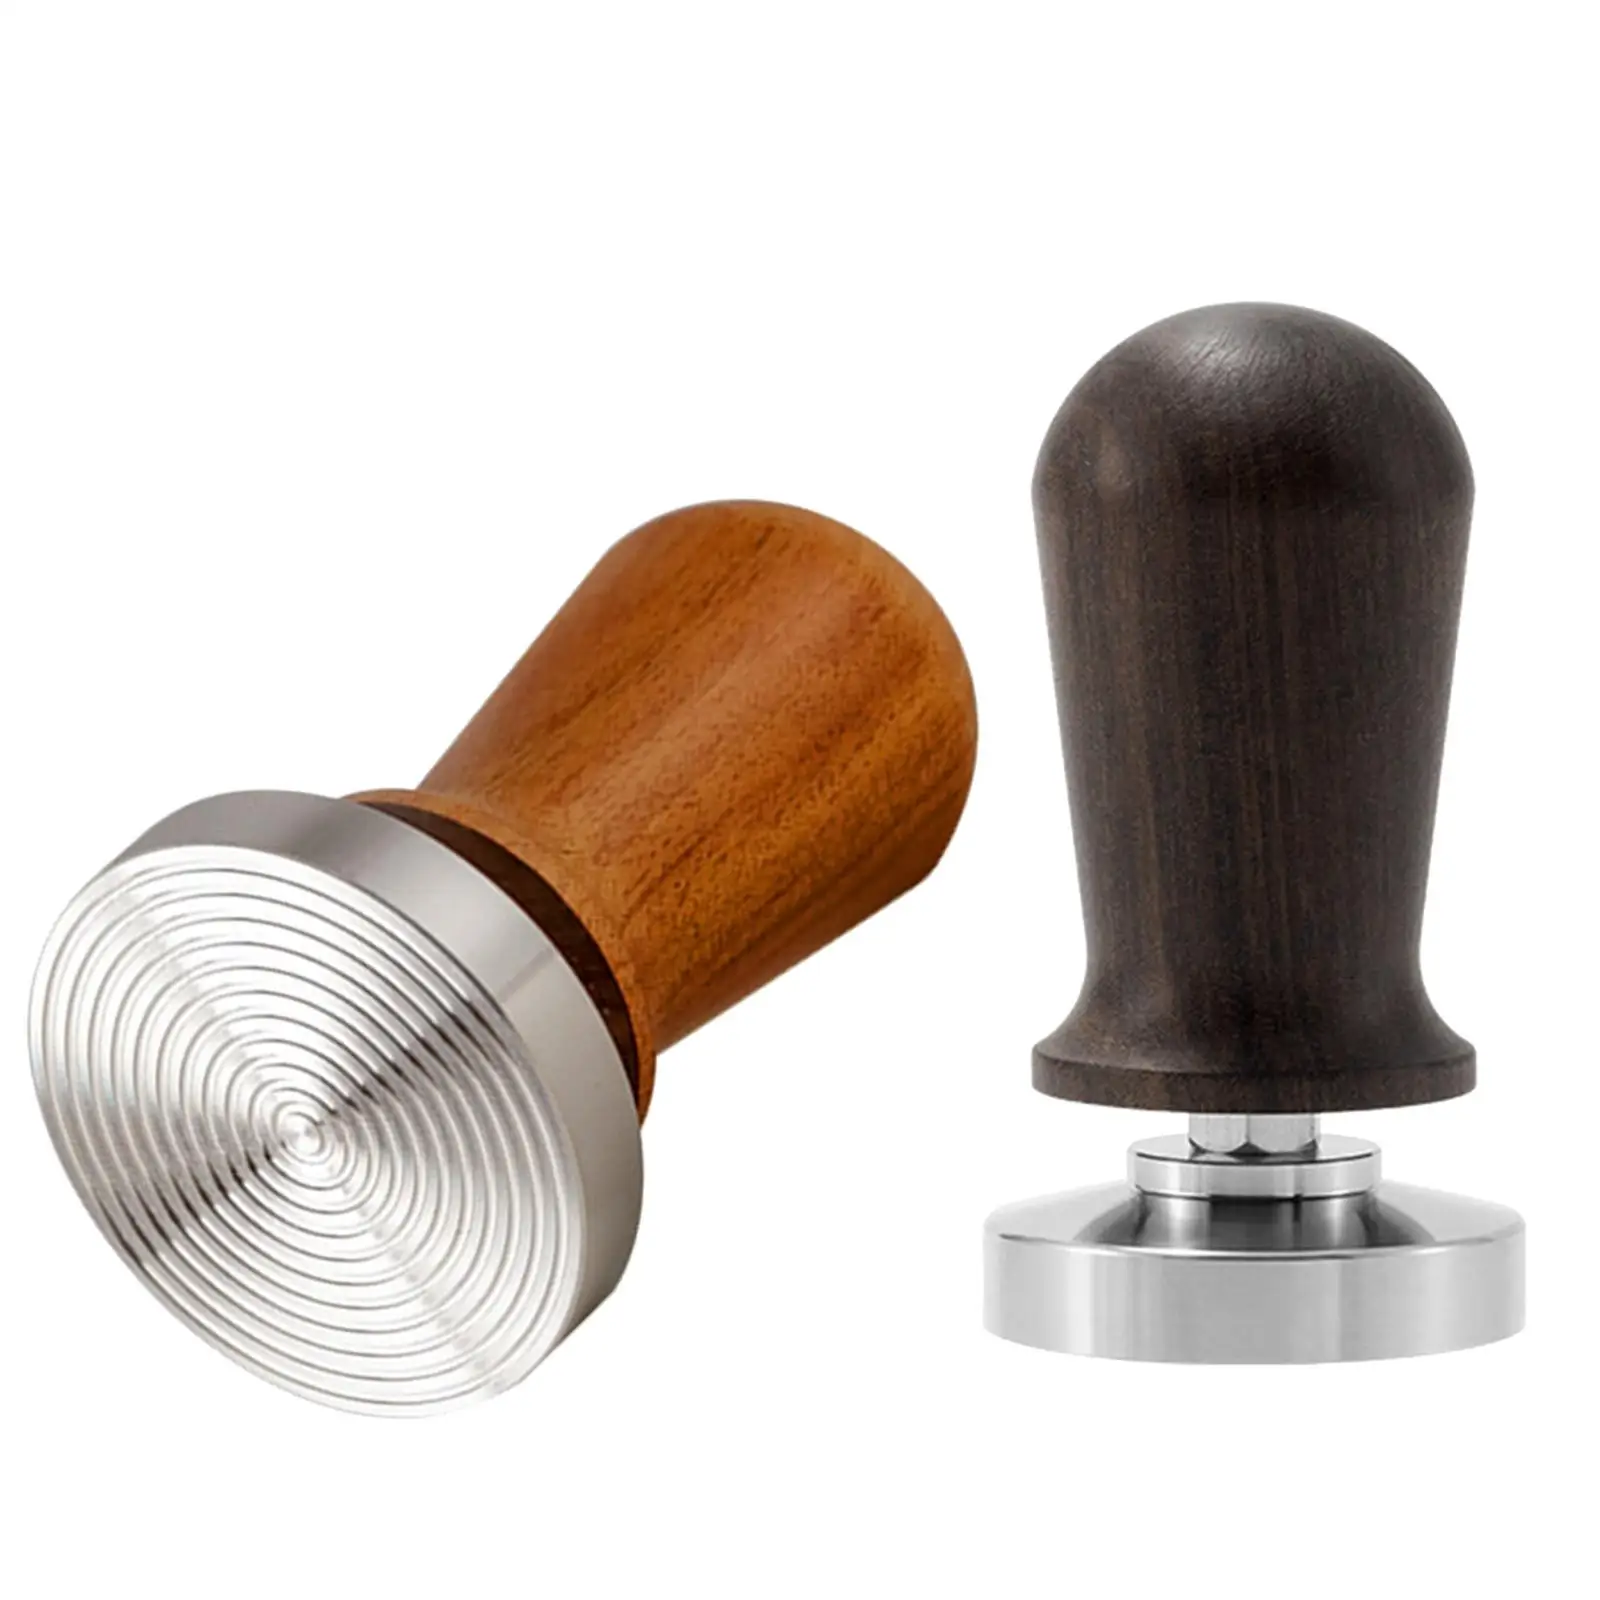 Calibrated Espresso Tamper Stainless Steel Base for Portafilter Coffee Machine Exquisite Appearance Coffee Ground Press Compact